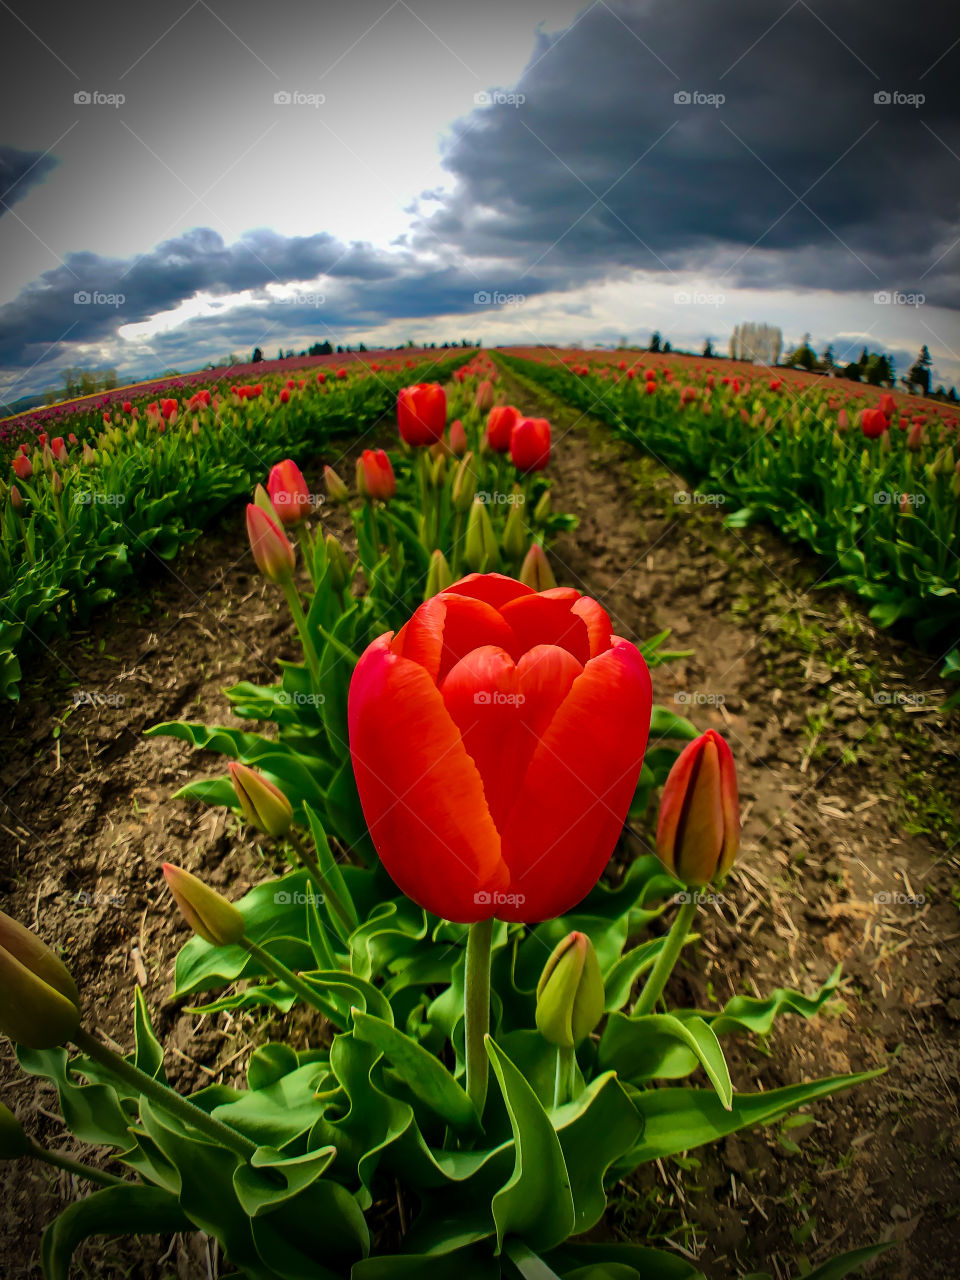 Foap Mission Spring The Signs of Spring! Bright Red Tulips of Spring In The Skagit Valley Washington State’s Tulip Fields 🌹